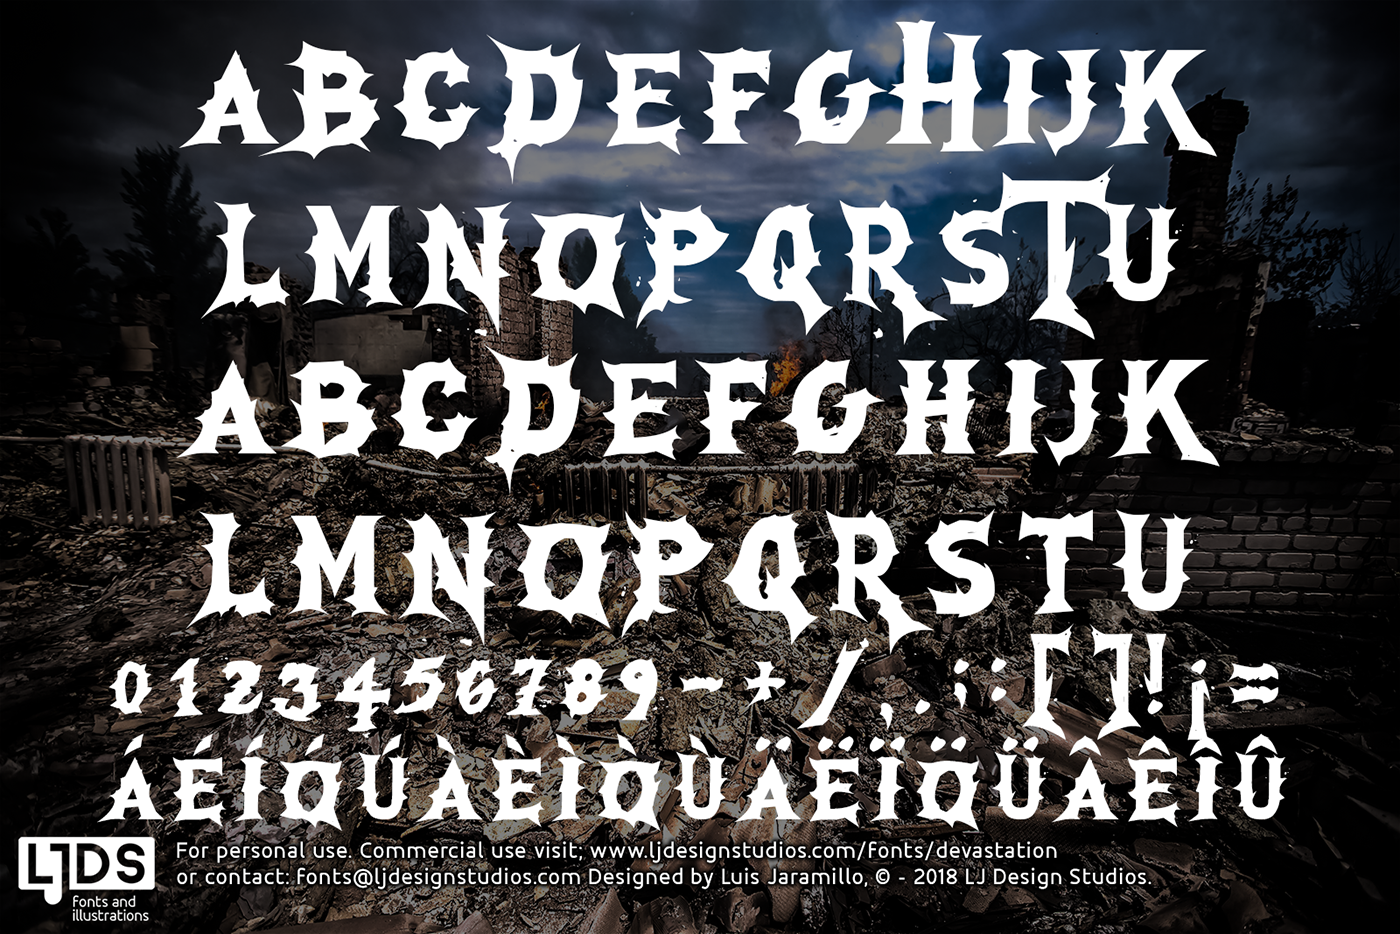 hwo to read death metal font